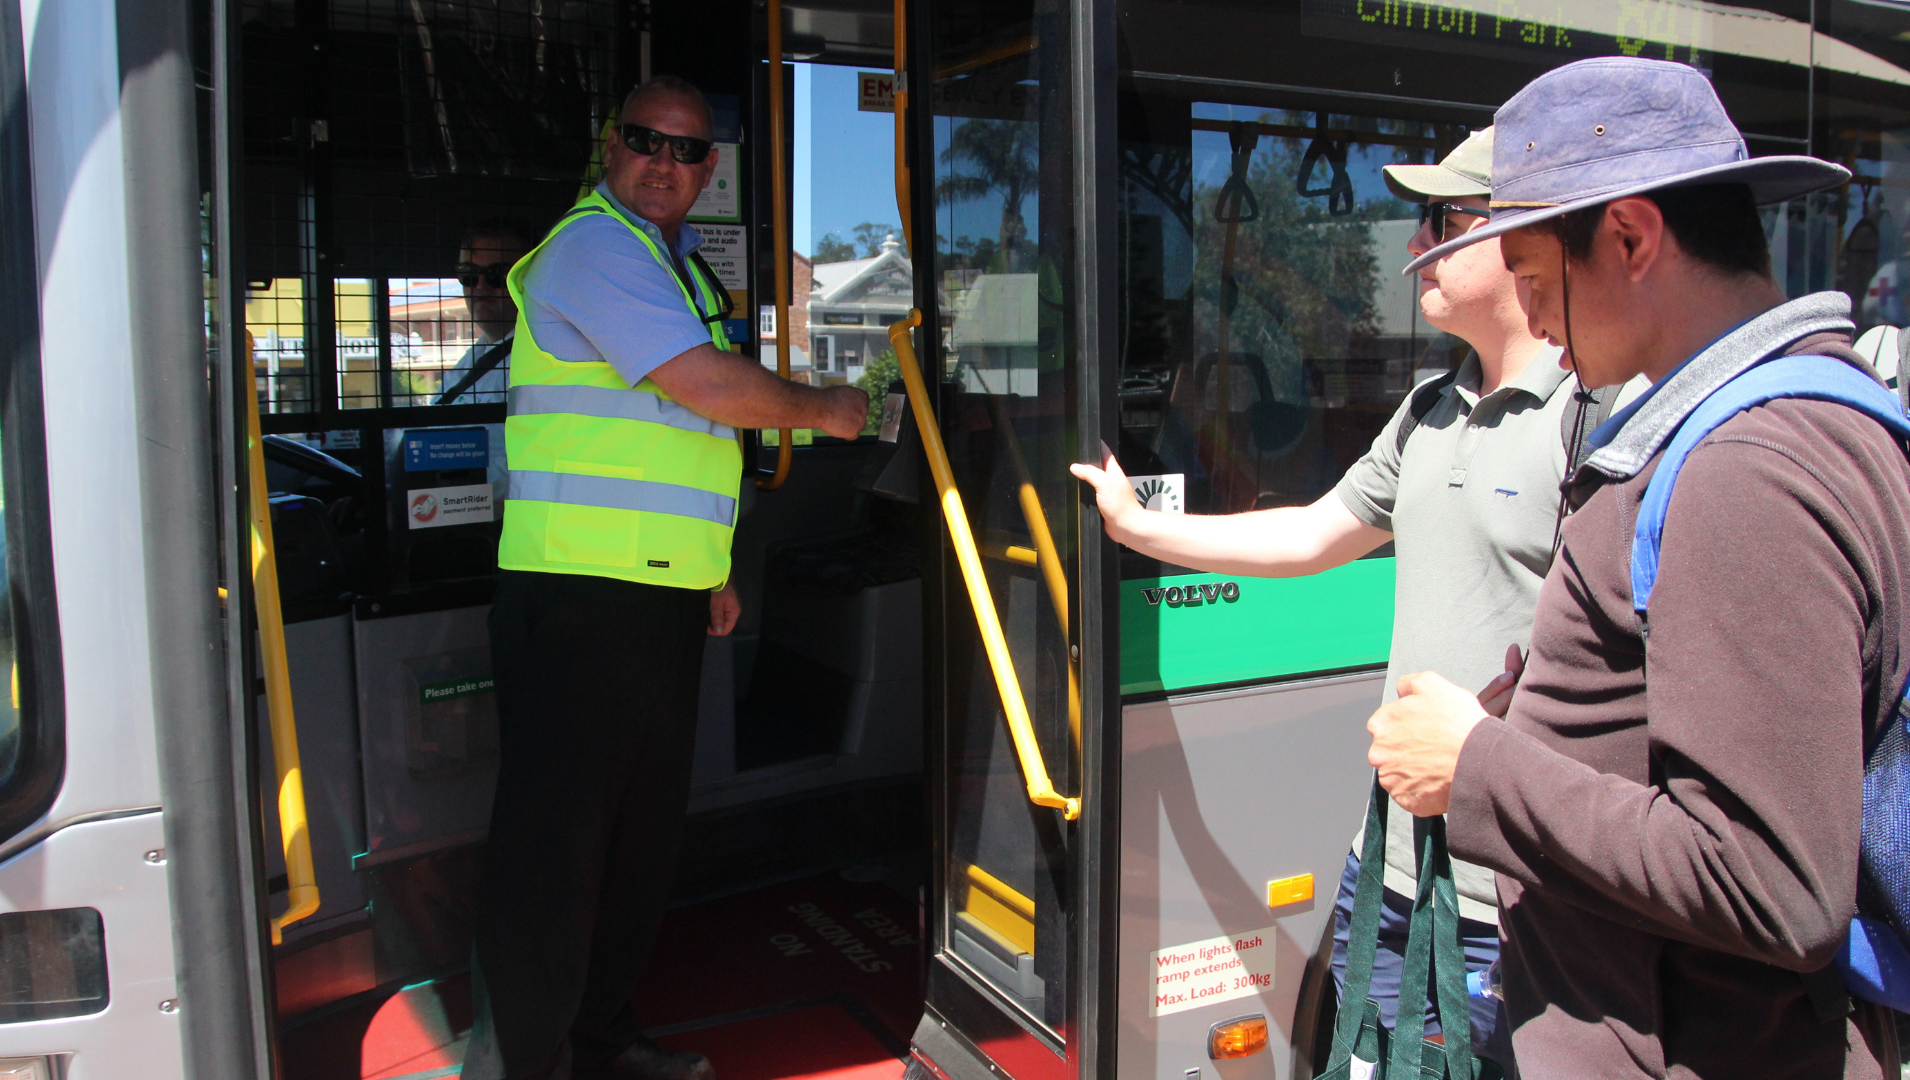 Transperth bus drive speaking to a small crowd of people at the public transport event